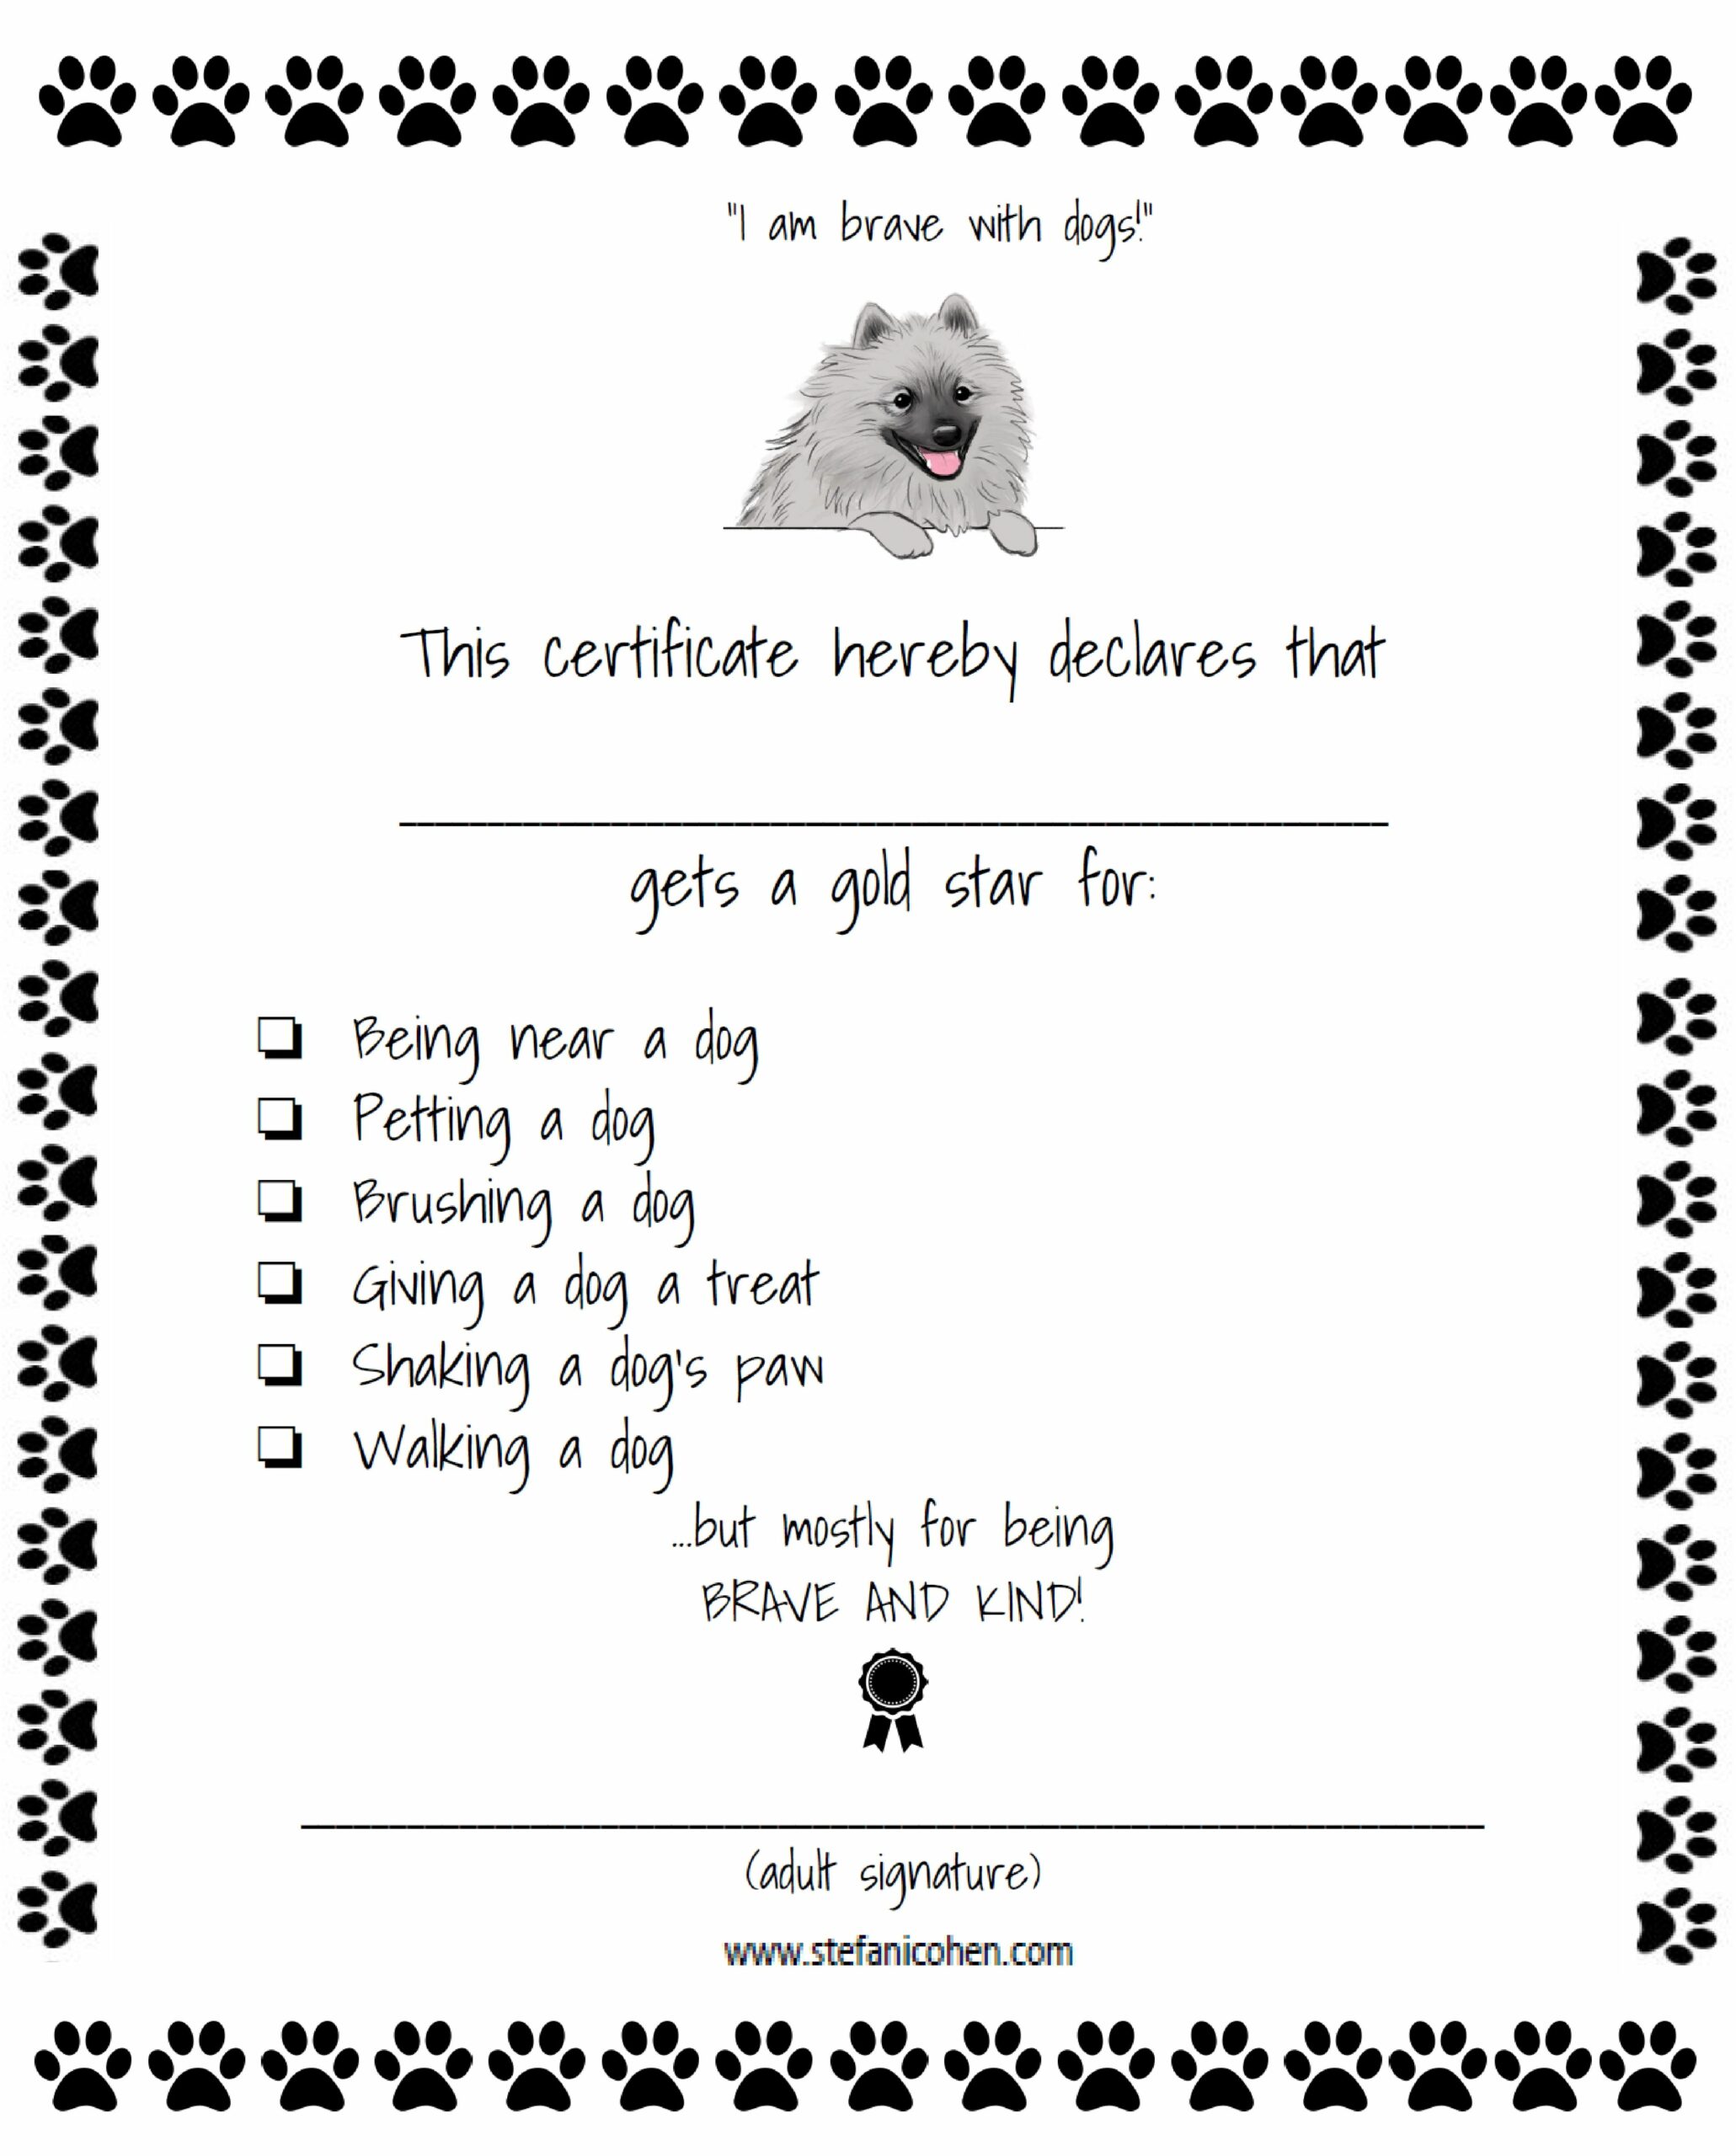 Brave with Dogs Certificate